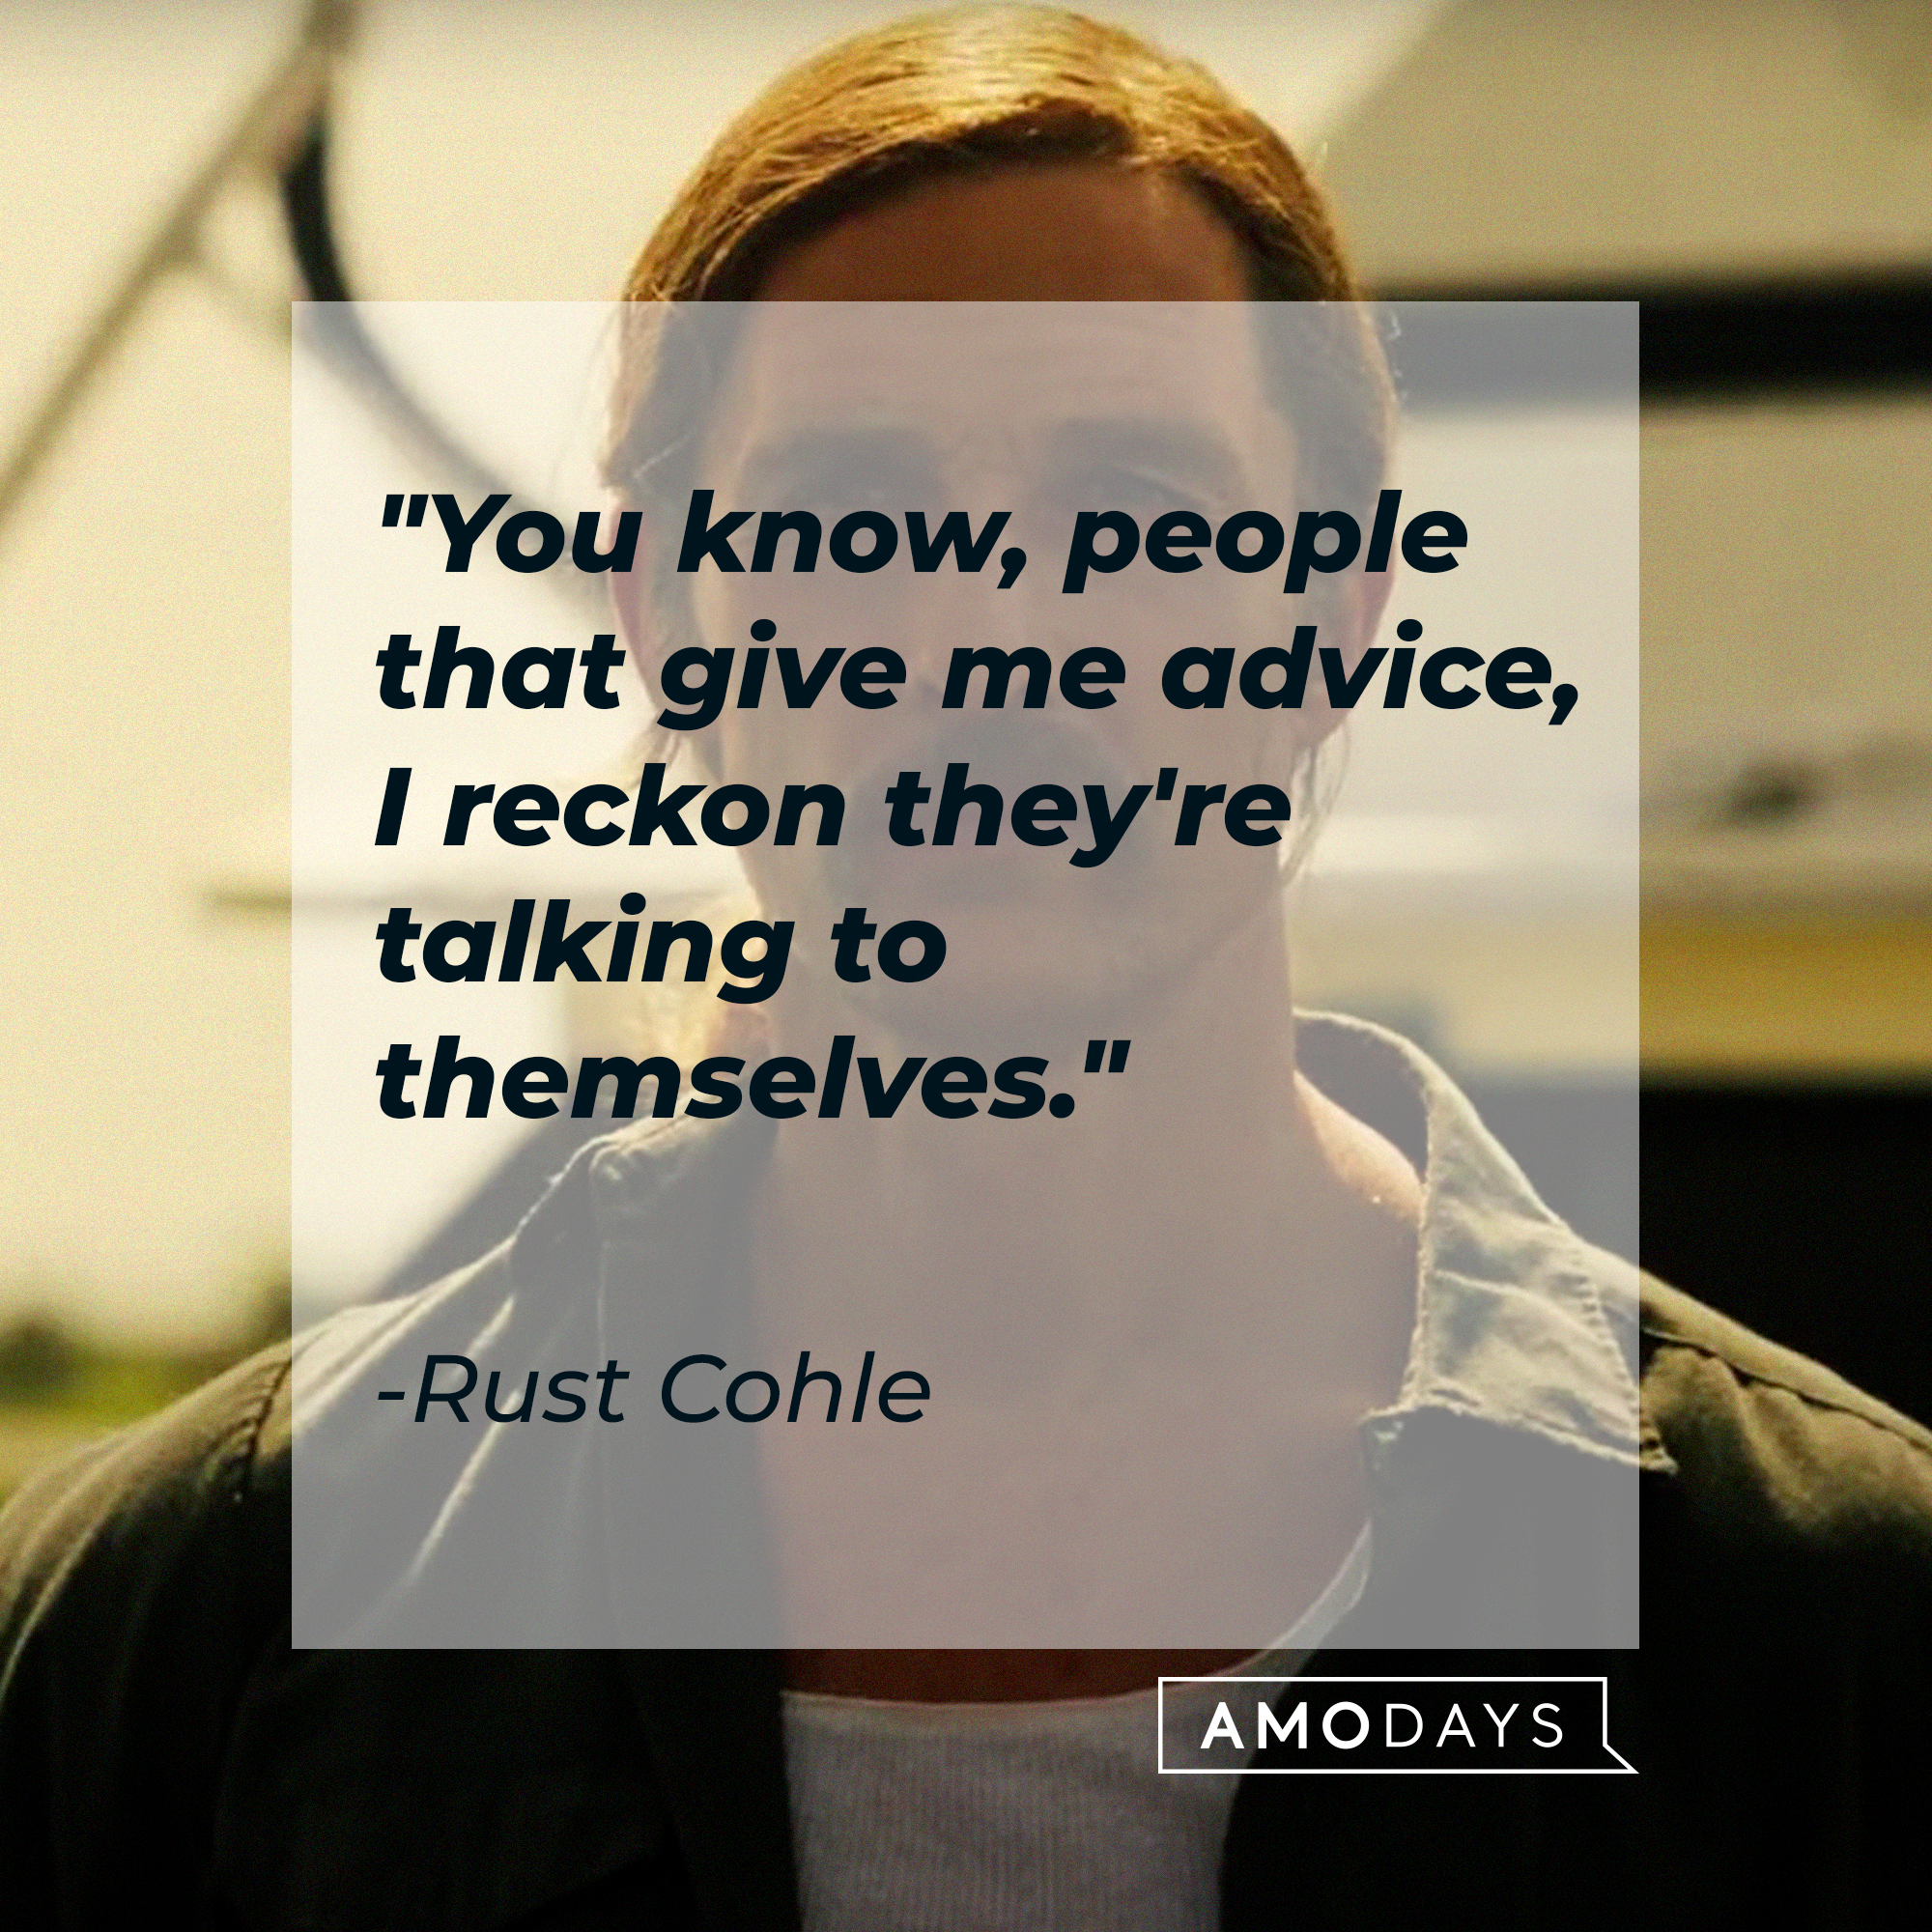 Rust Cohle's quote: "You know, people that give me advice, I reckon they're talking to themselves." | Source: facebook.com/TrueDetective